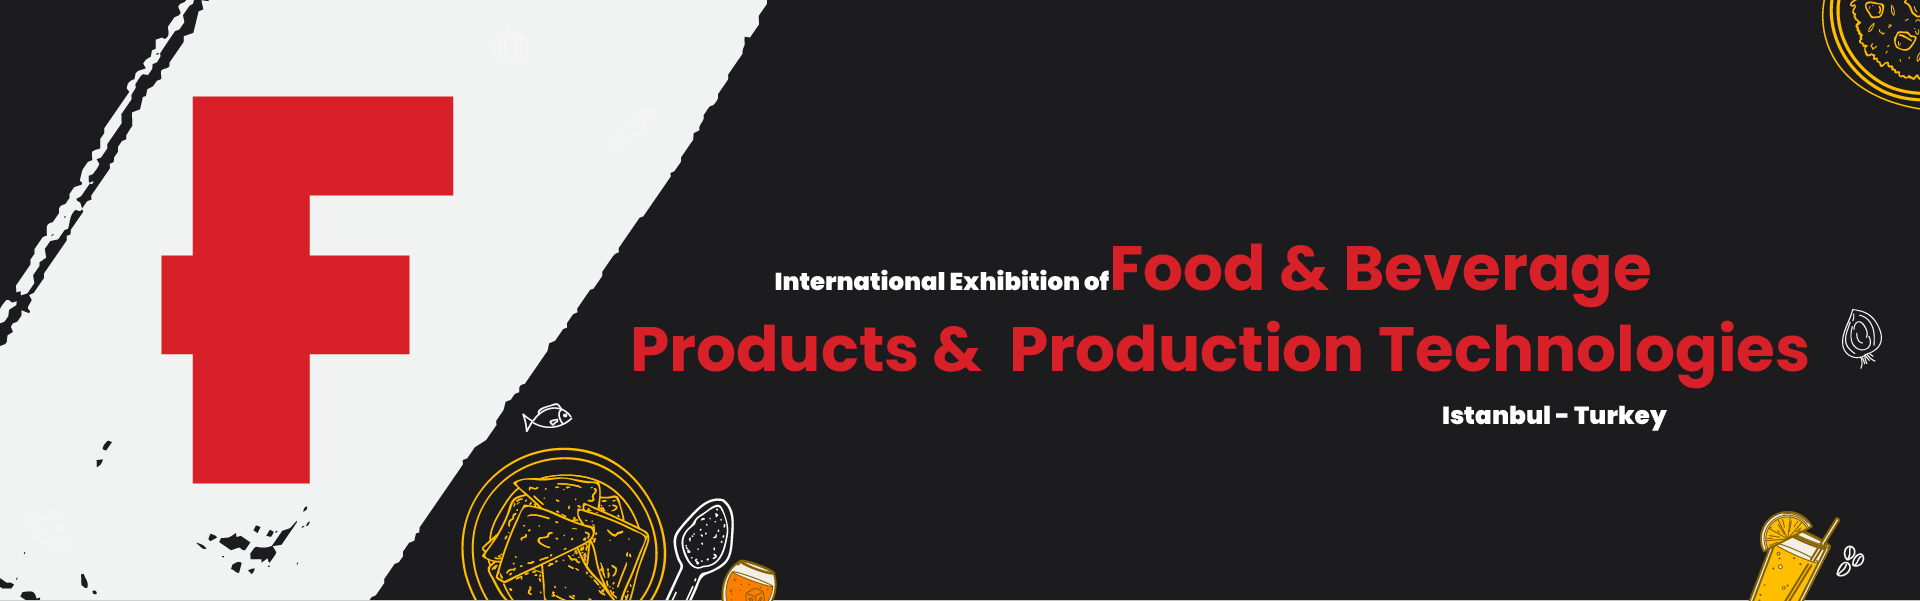 Food and Beverage Products & Packing Exhibition Istanbul Turkey